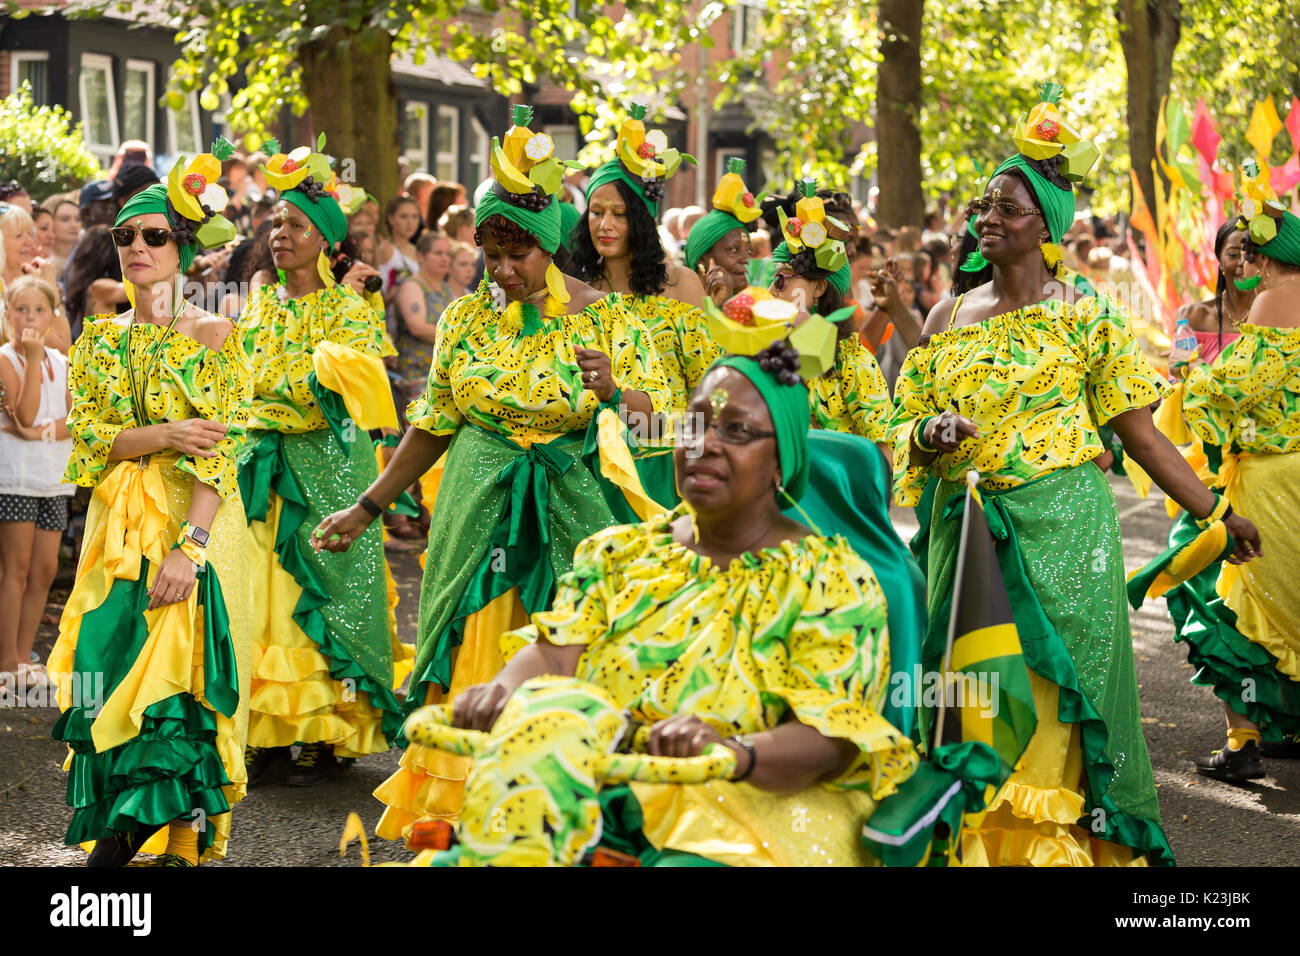 Leeds, UK. 28th Aug, 2017. Dancers dressed in colourful costumes at ...